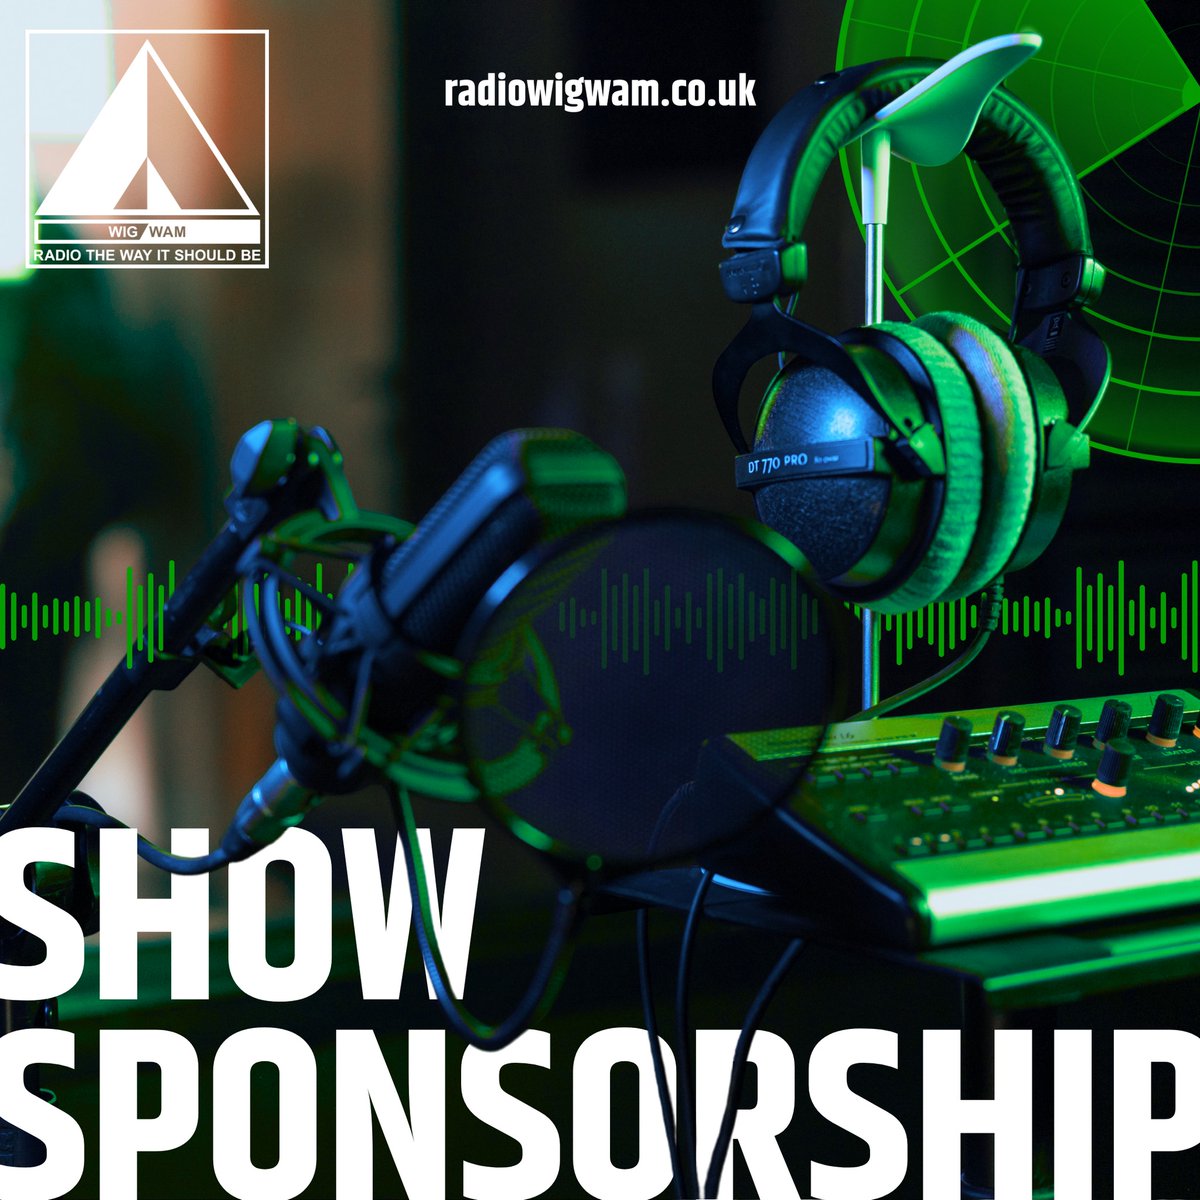 Sponsor a Radio Wigwam Show! You get: -20-sec. ad spot during the show -Promotion across all our channels (web, Facebook, Instagram & Twitter) -Shoutouts from the DJ All monies are reinvested into Radio Wigwam, to continue championing indie artists. Contact us for more!🎙